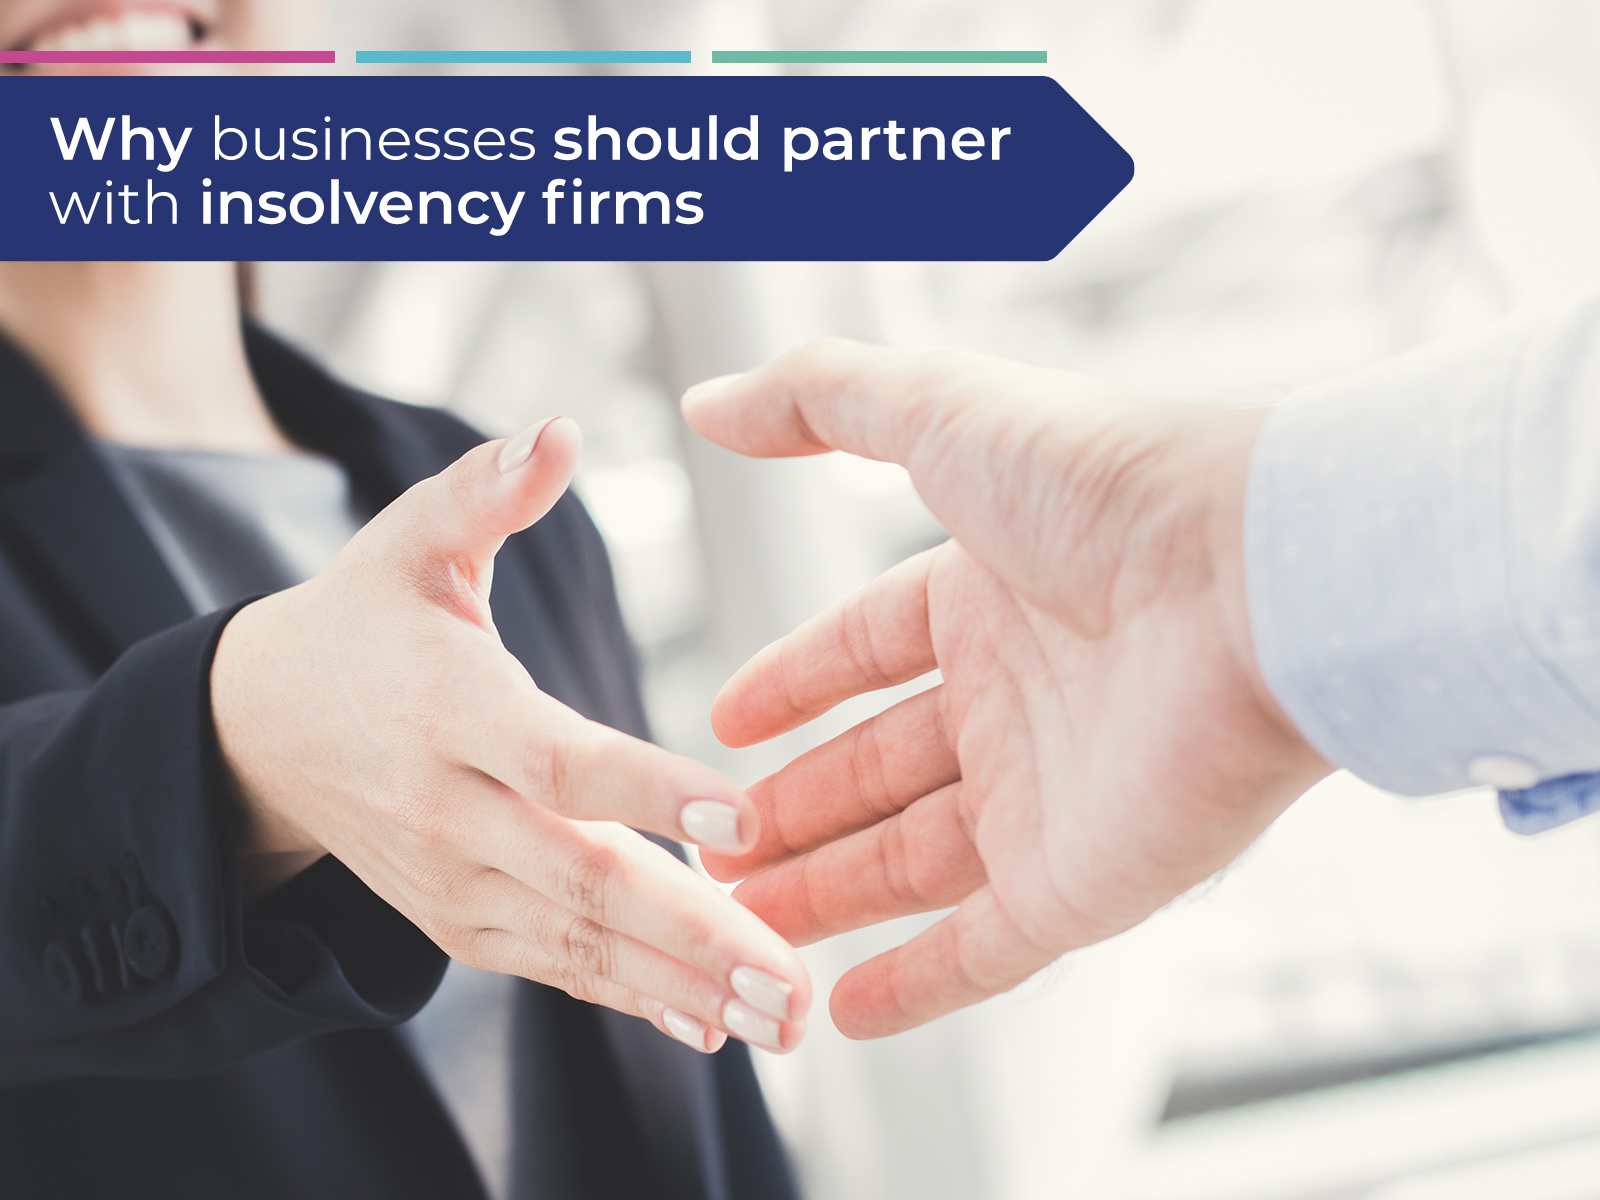 Why businesses should partner with insolvency firms